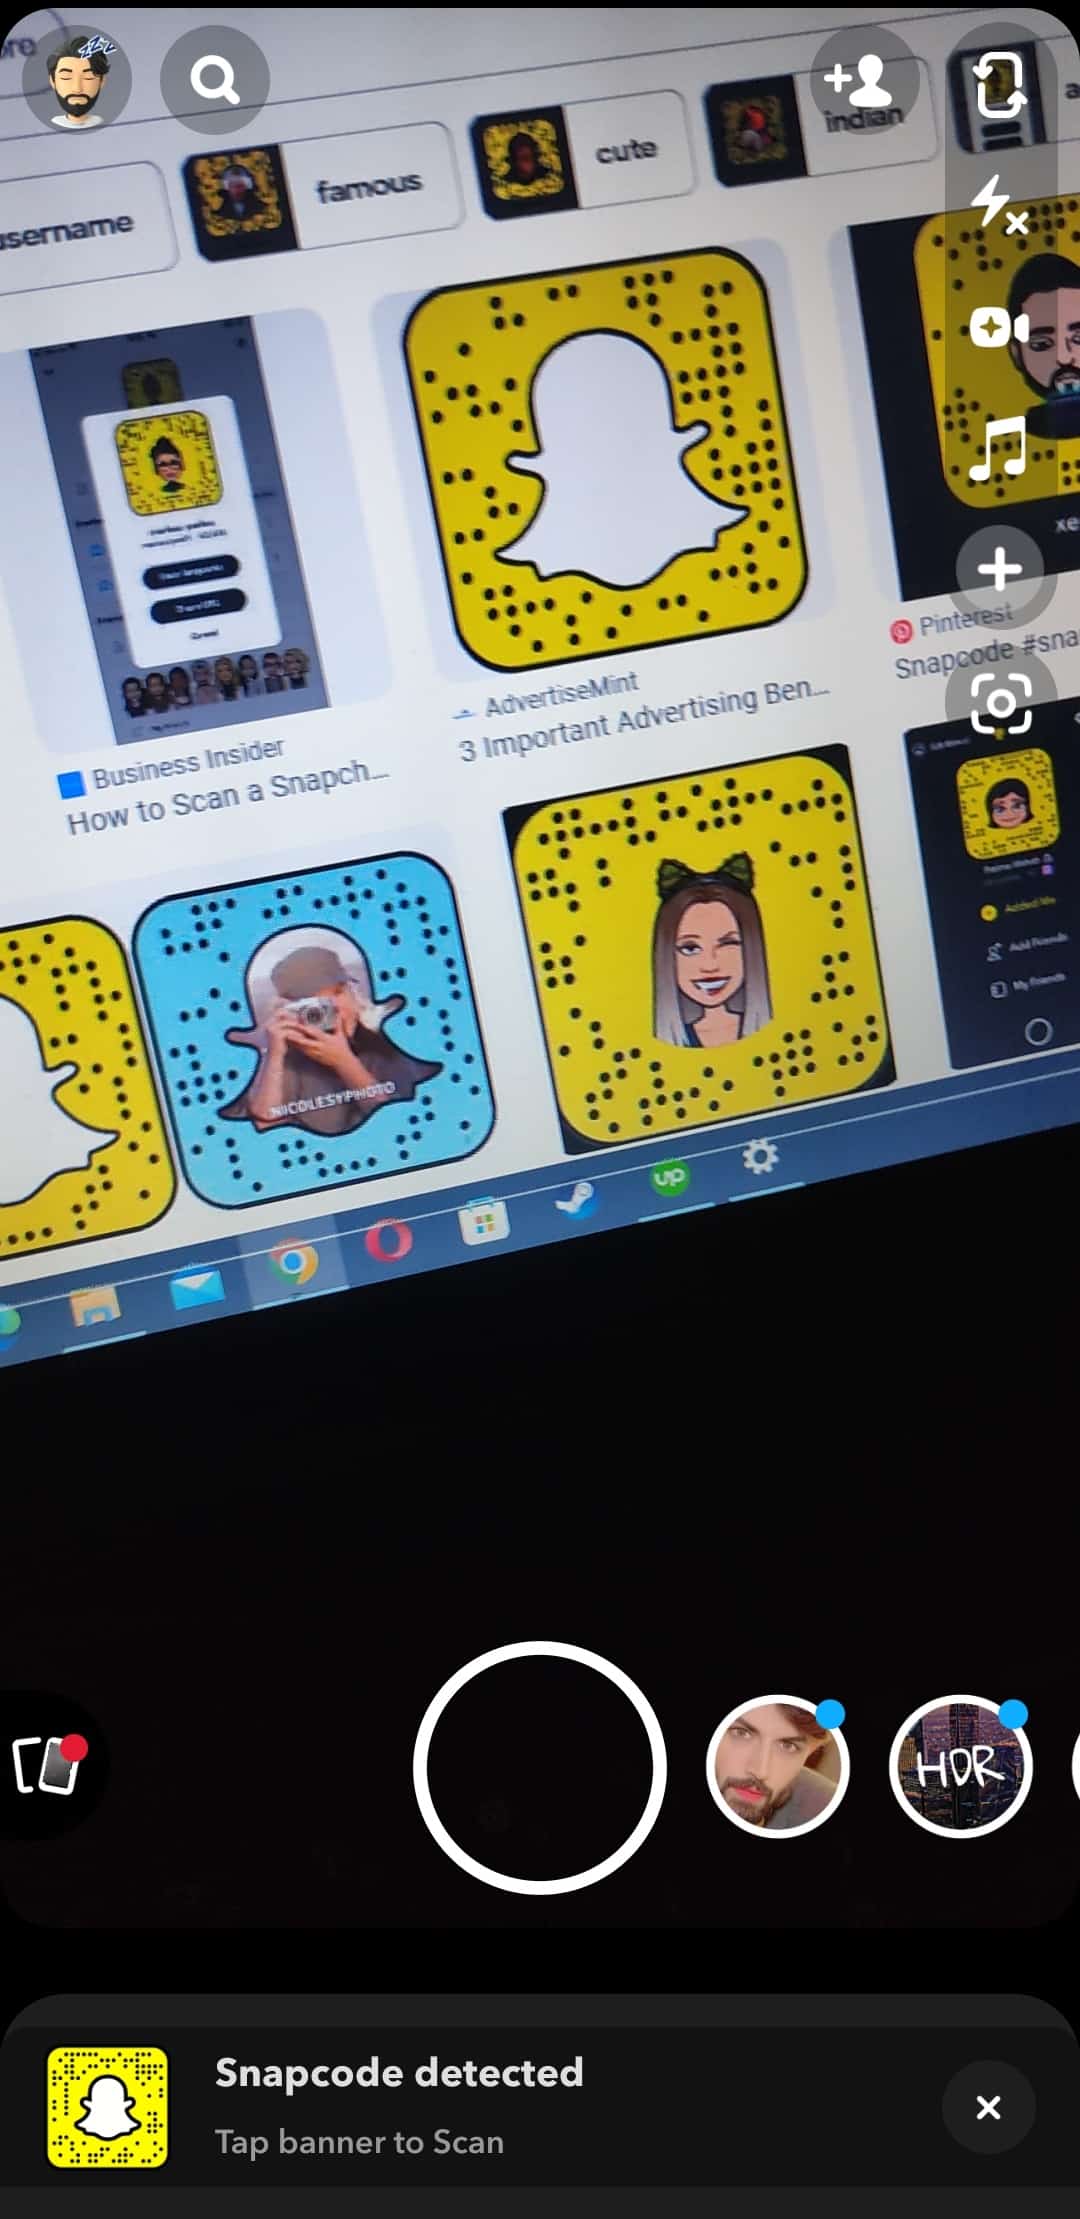 Open Your Snapchat App On Your Phone And Scan Any Of The Snapcode